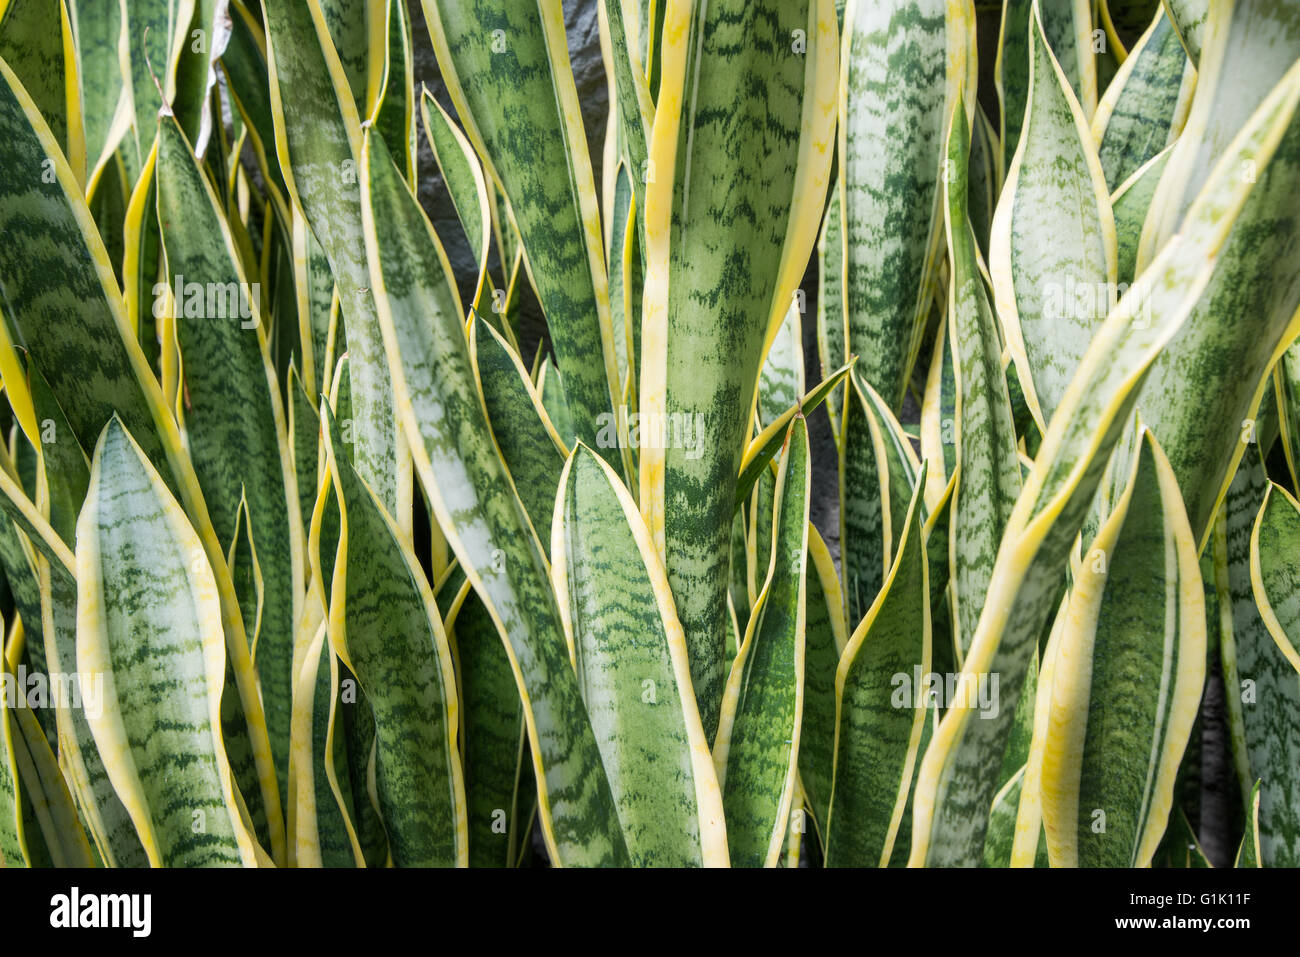 Long and tall green, yellow leaves Stock Photo